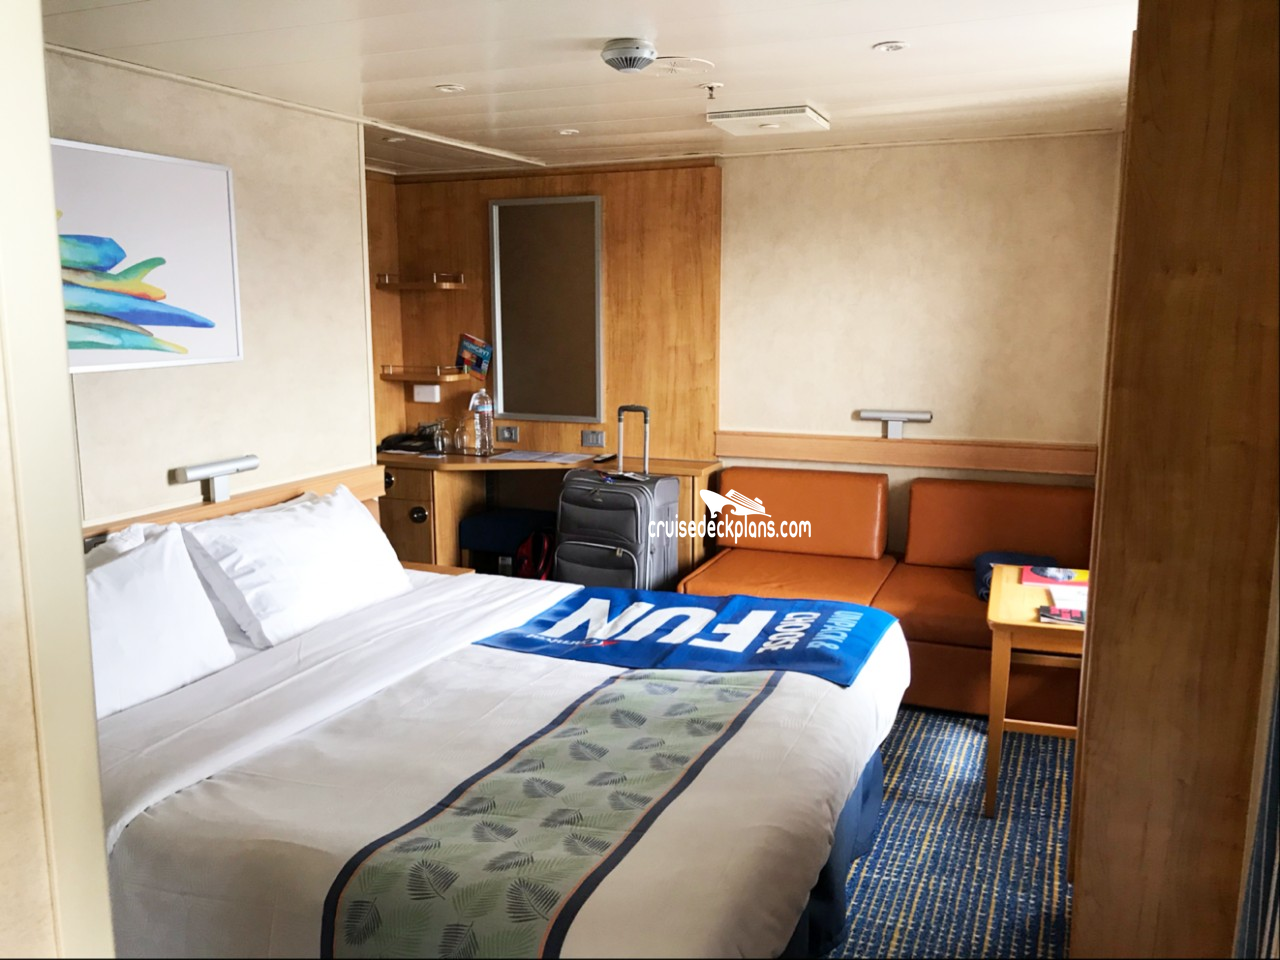 carnival cruise room square footage